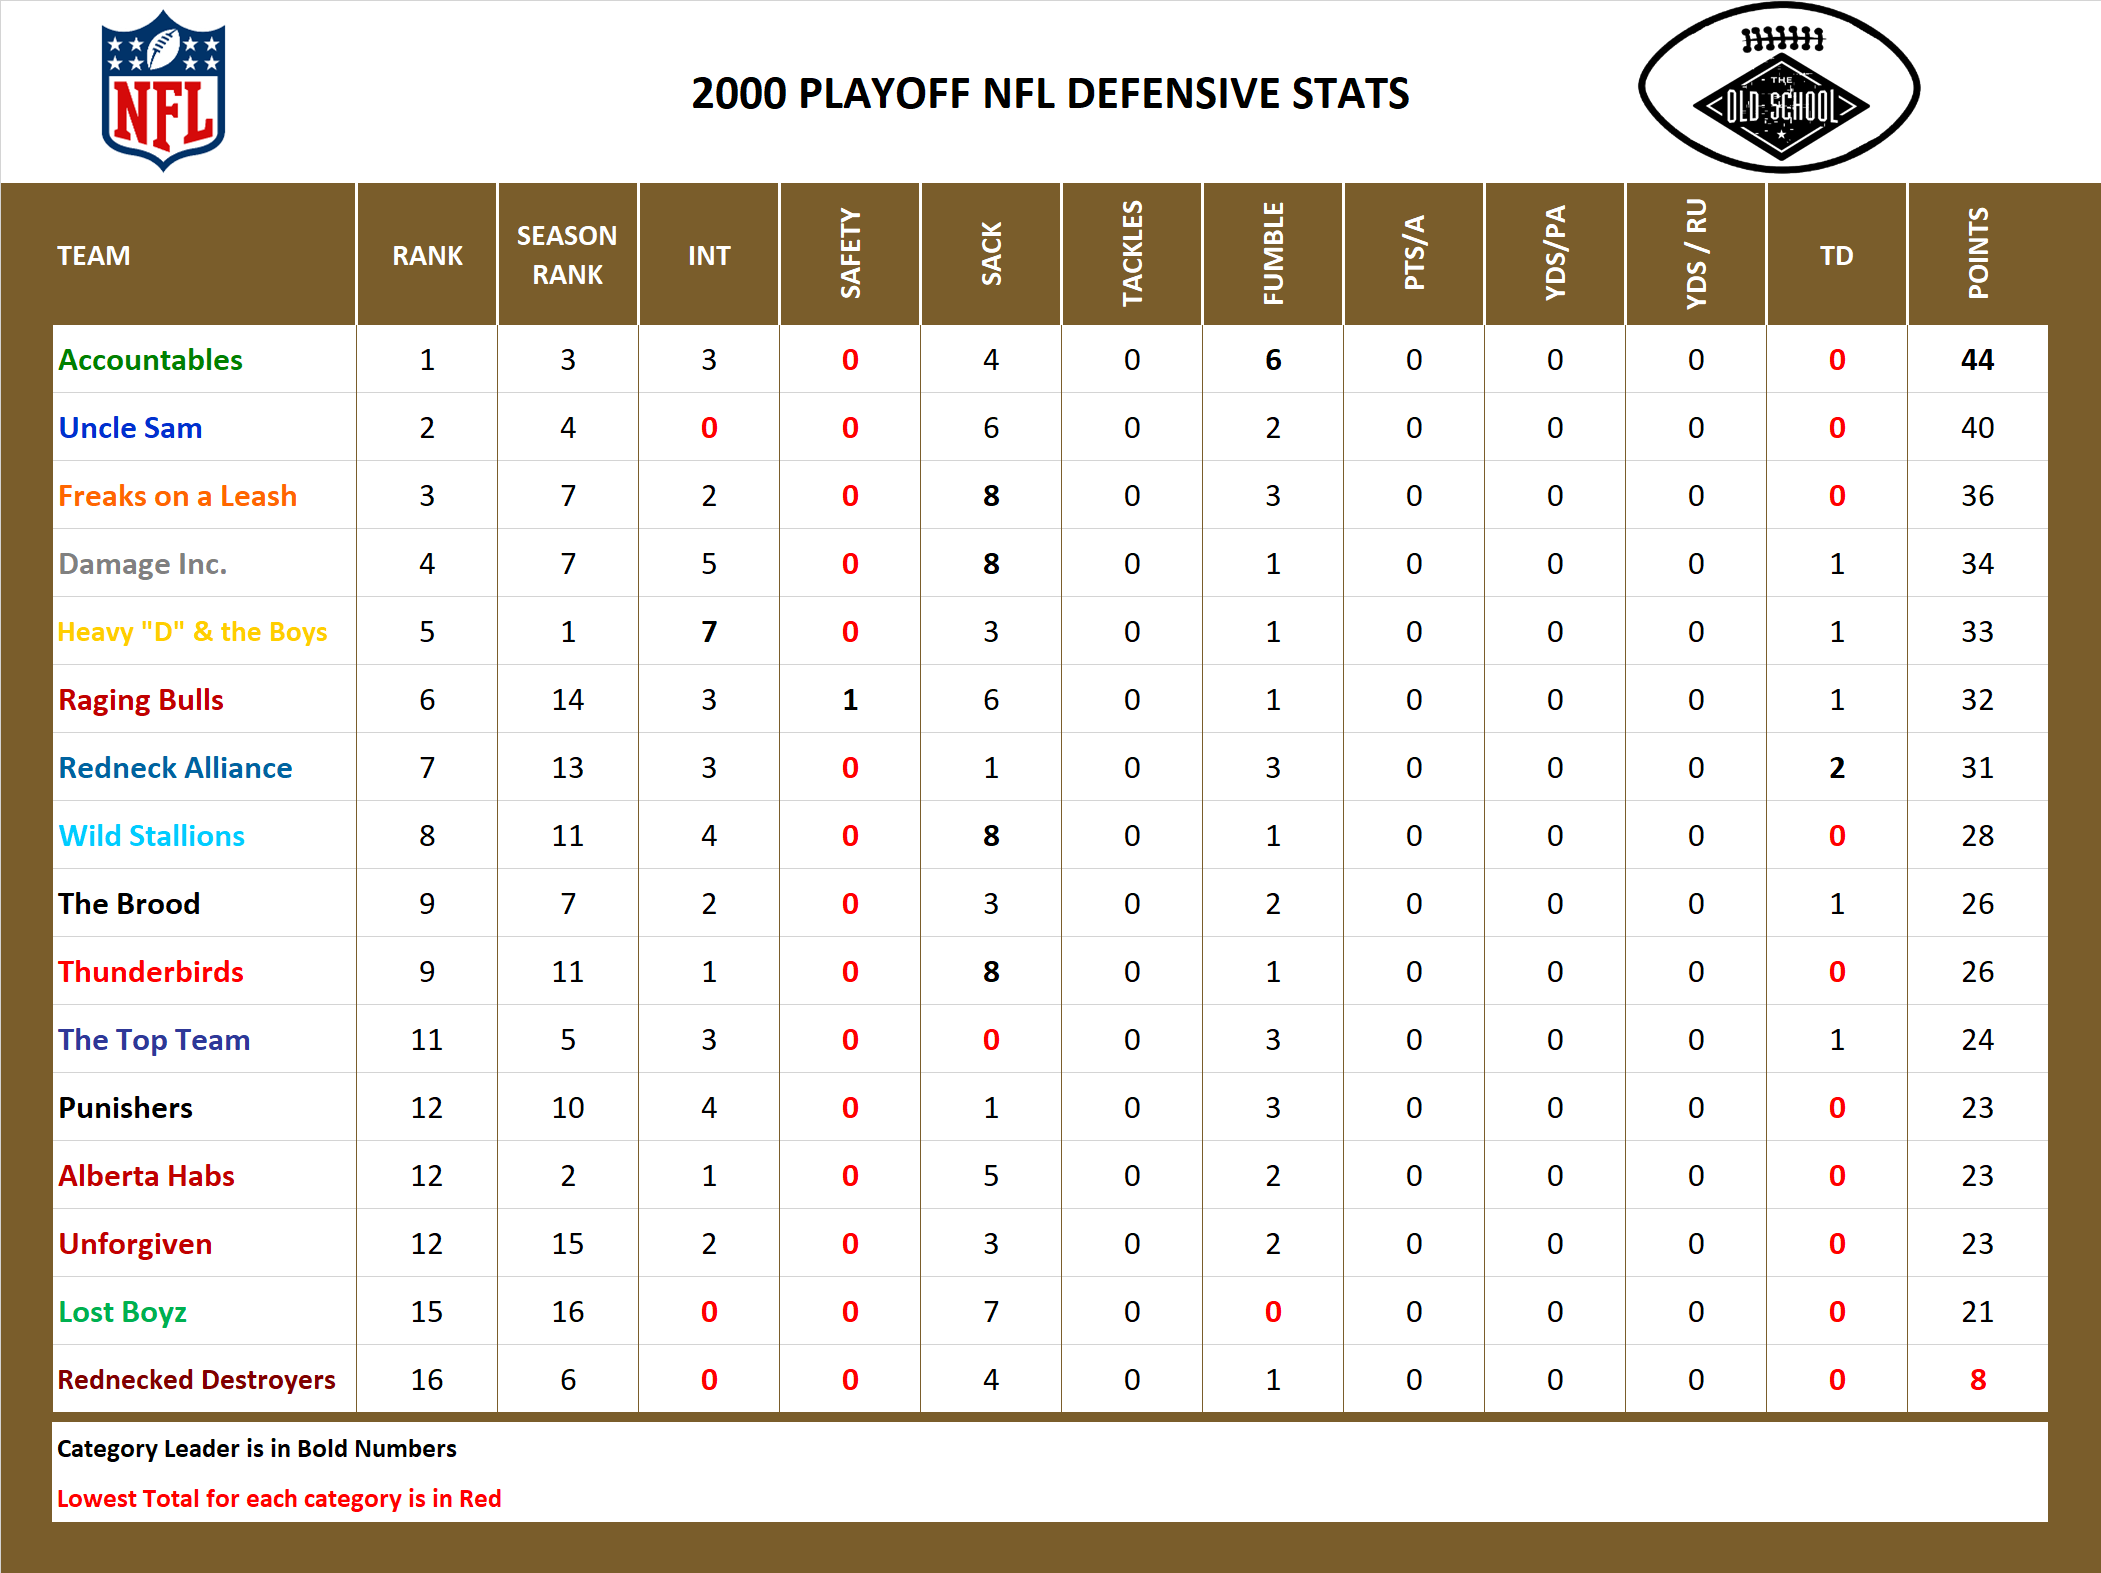 2000 National Football League Pool Playoff Defensive Stats